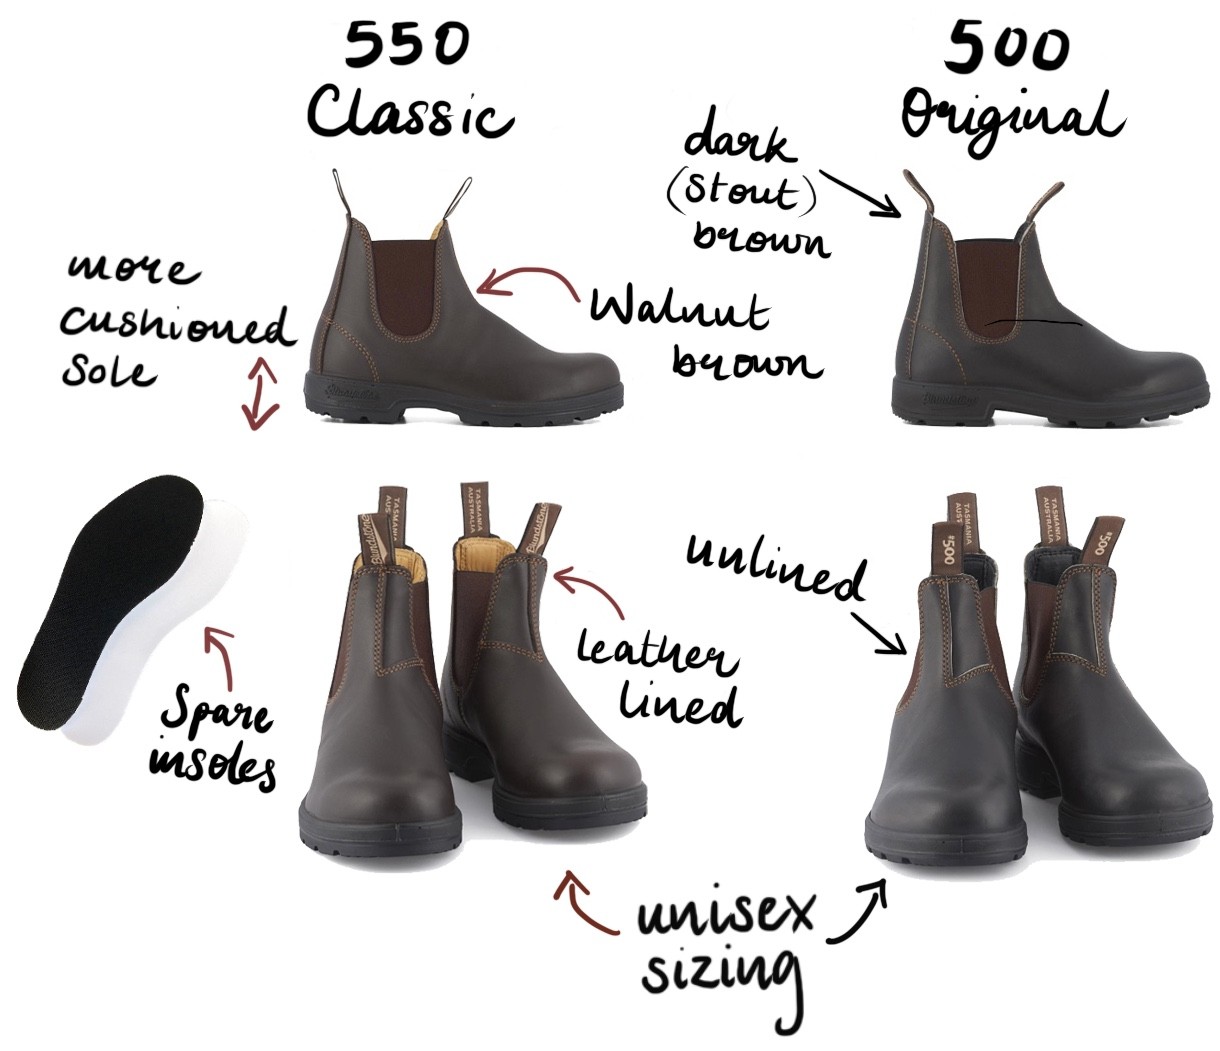 What is the Difference Between Blundstone Original and Classic?